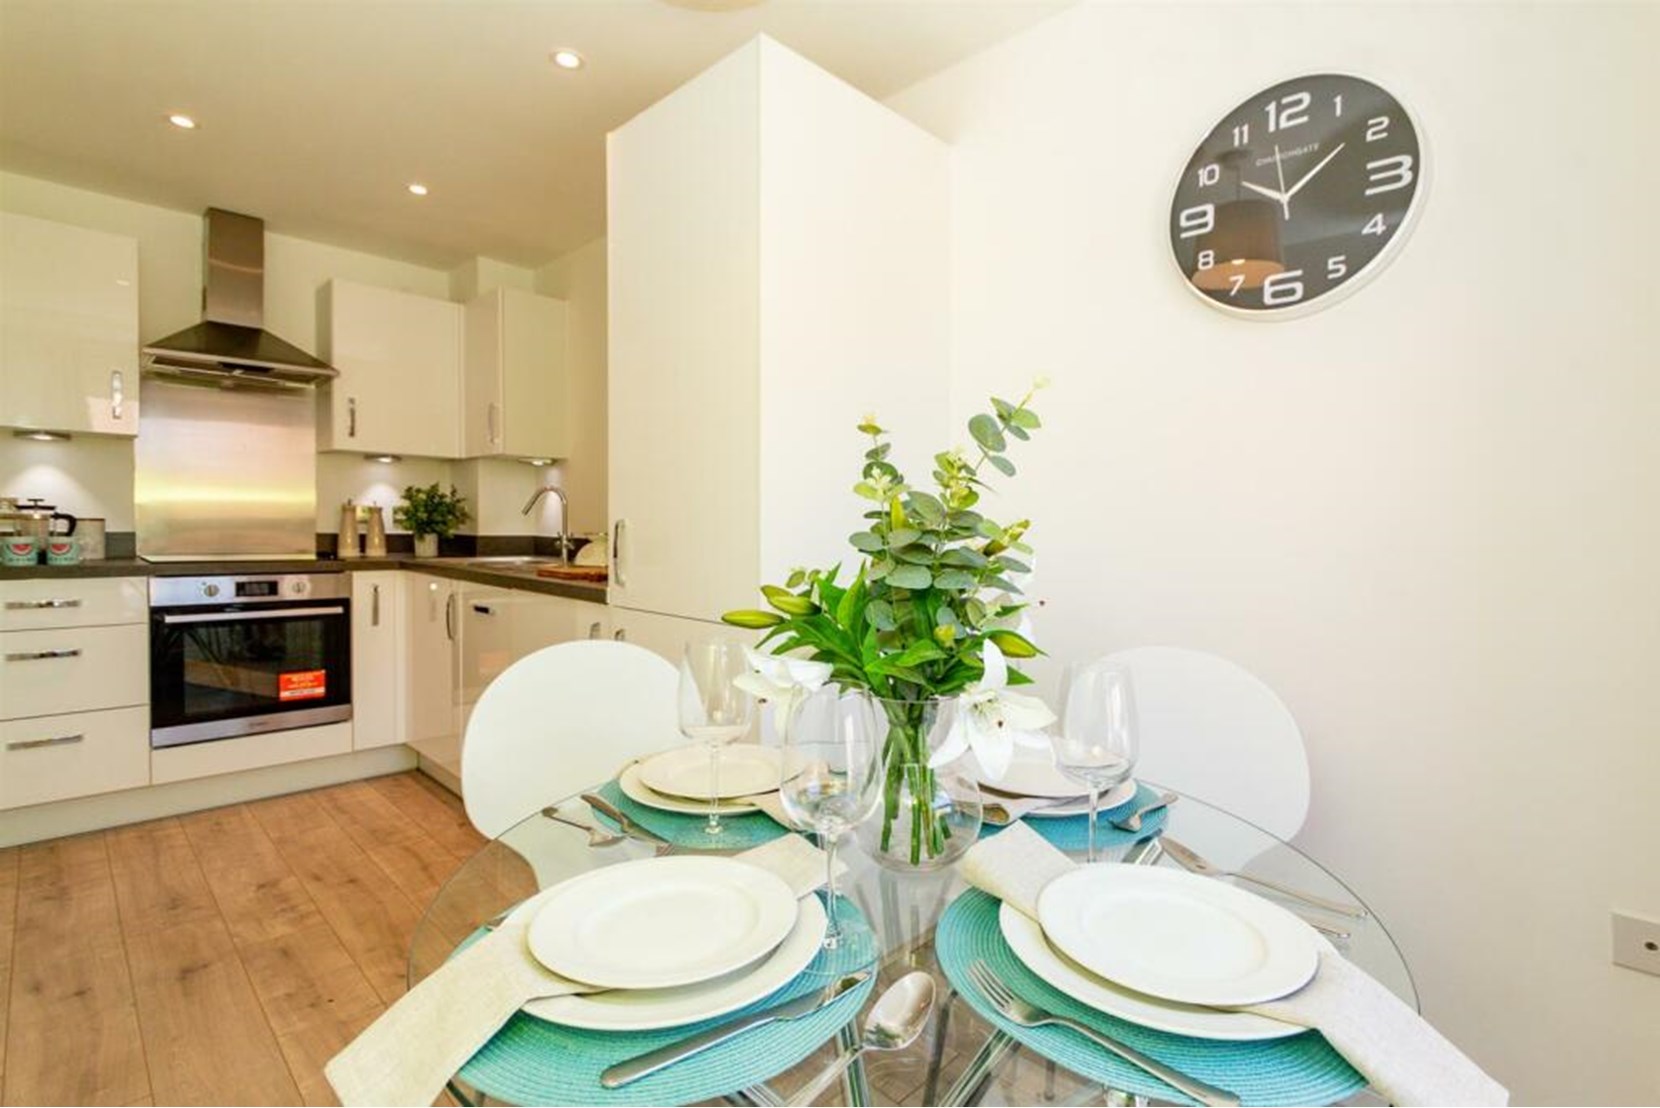 Houses by Simple Life to Rent, The Harcourt, 2 bedroom house, kitchen dining area